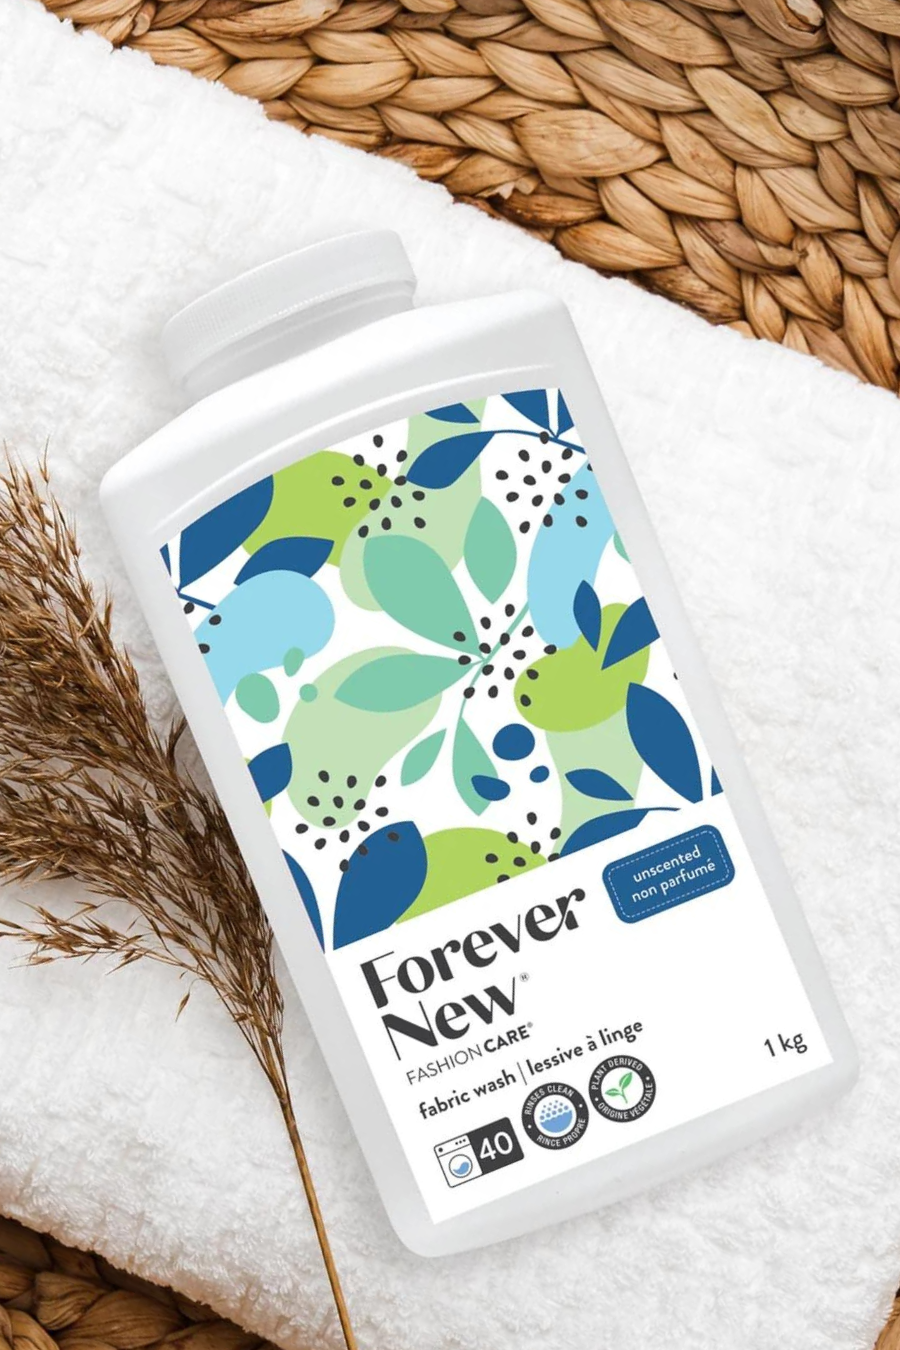 Forever New Laundry Classic Powder Unscented